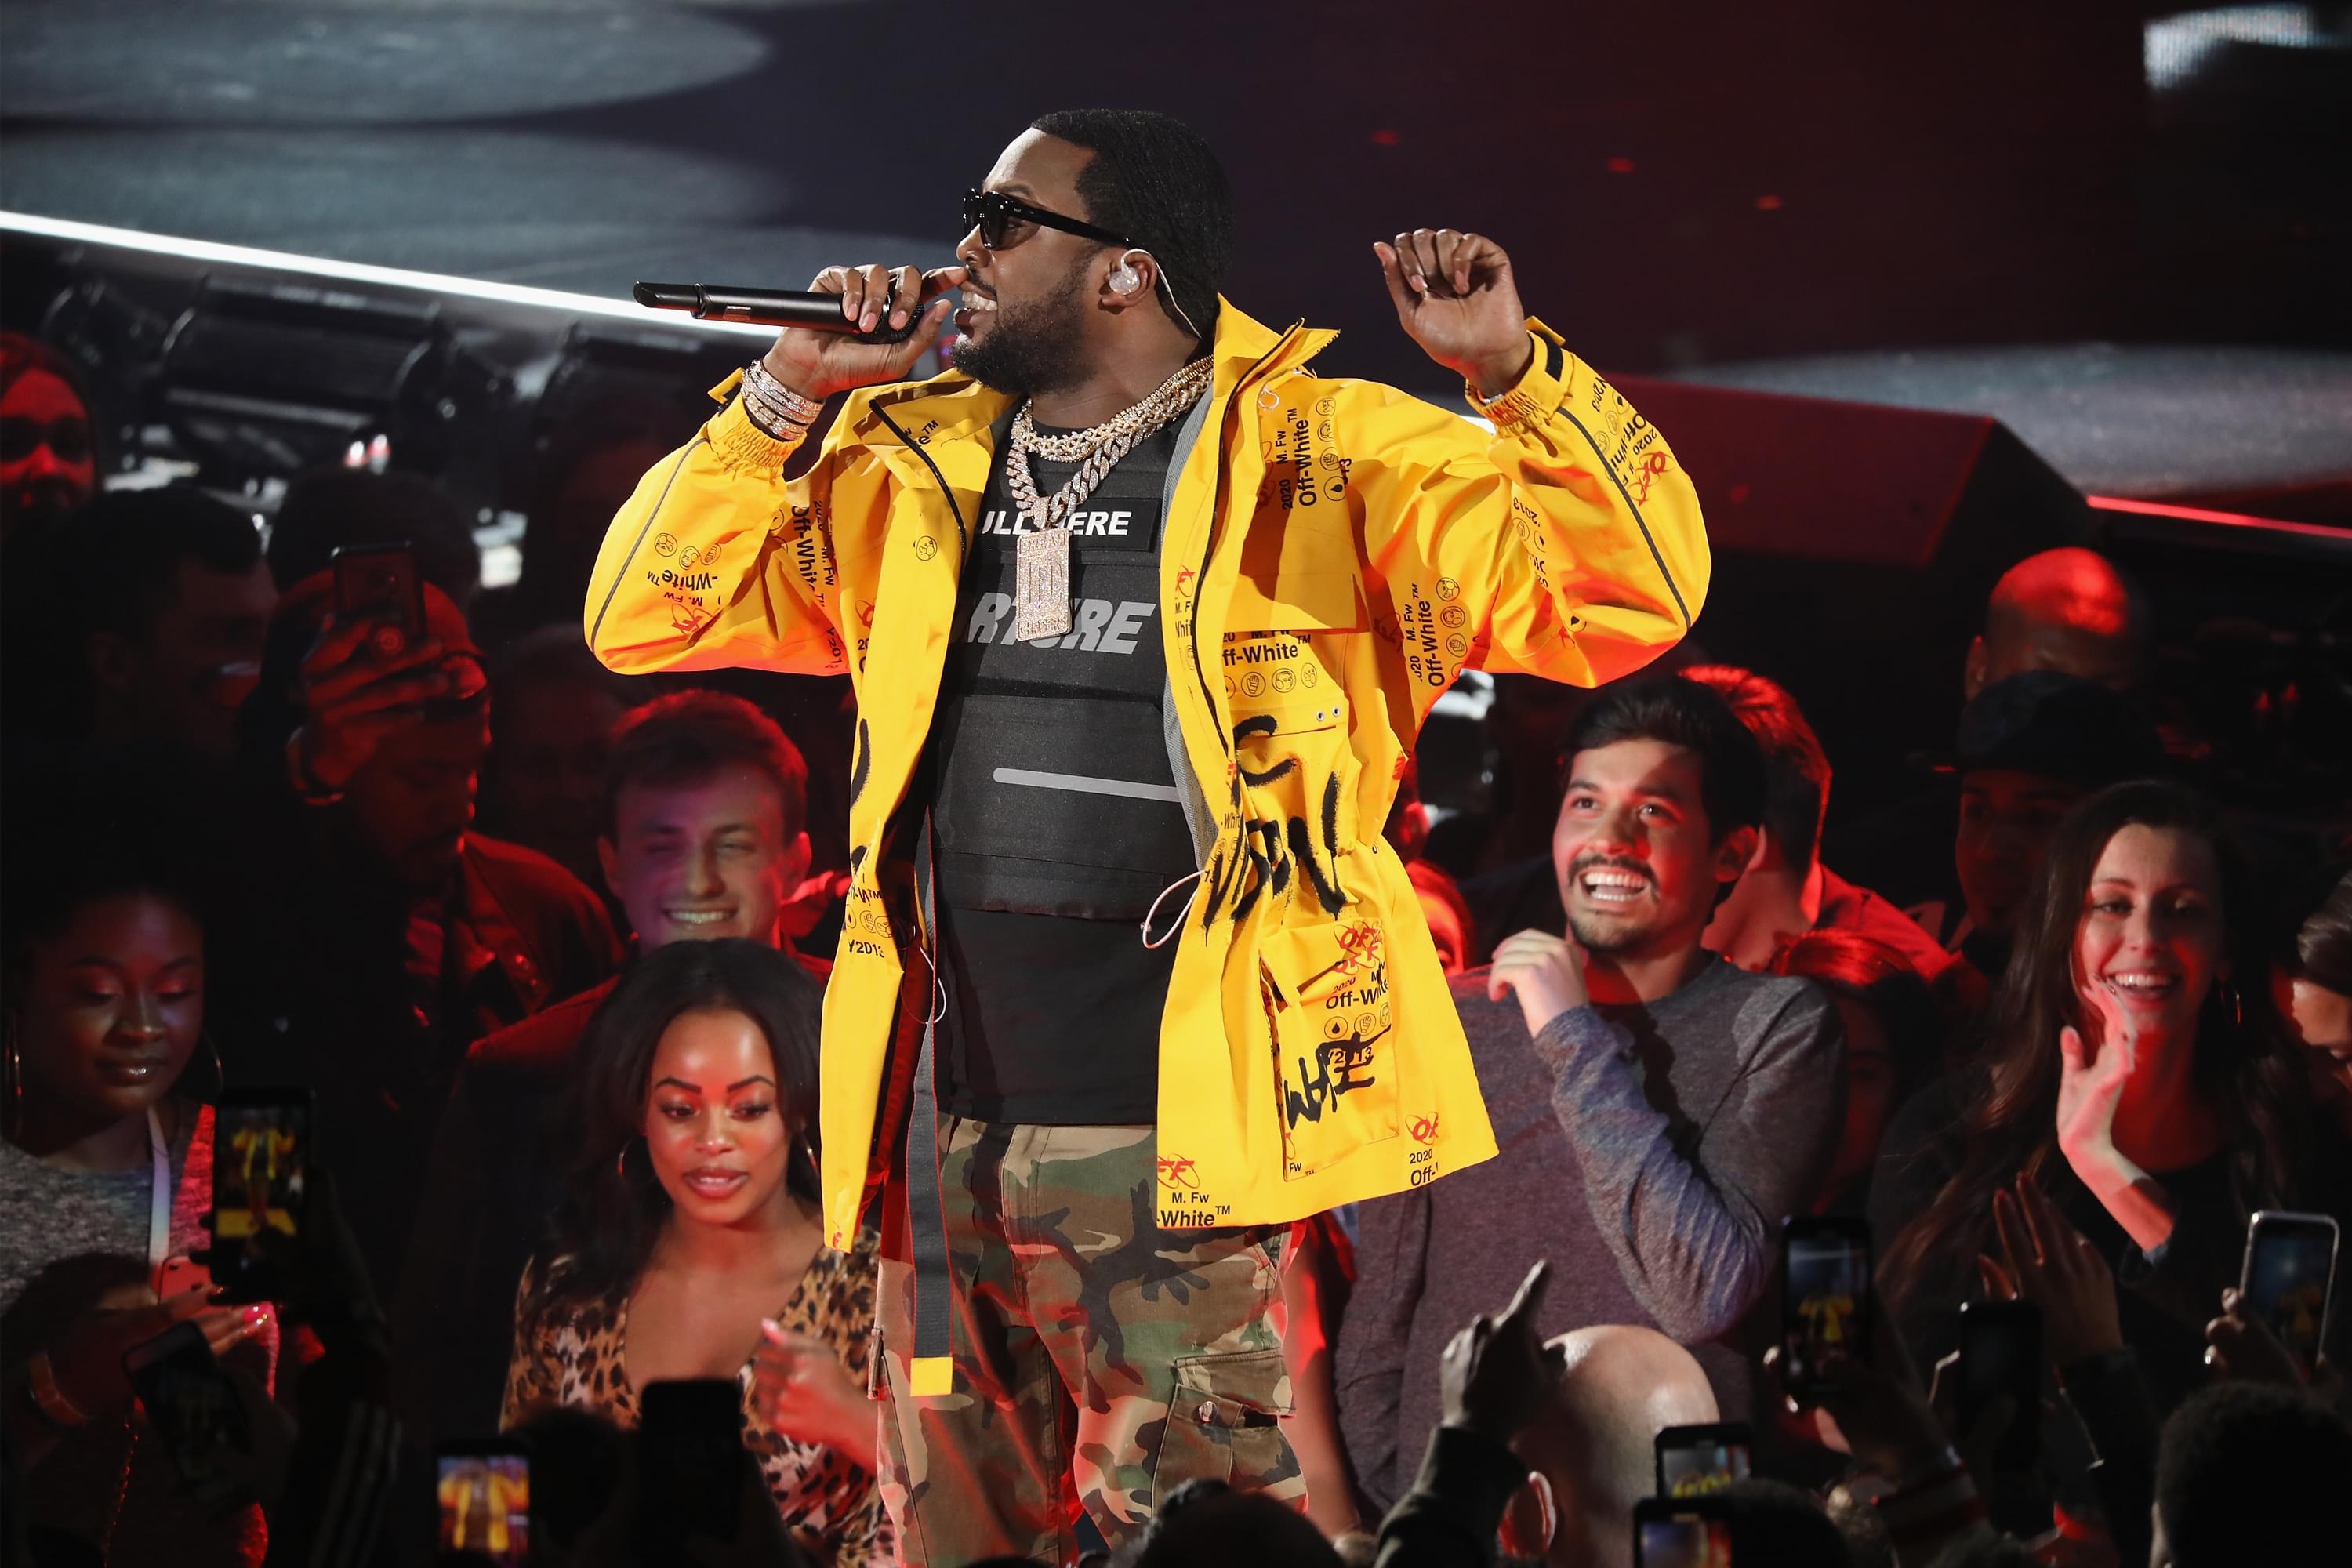 The Cosmopolitan Hotel Plans to Publicly Apologize to Meek Mill